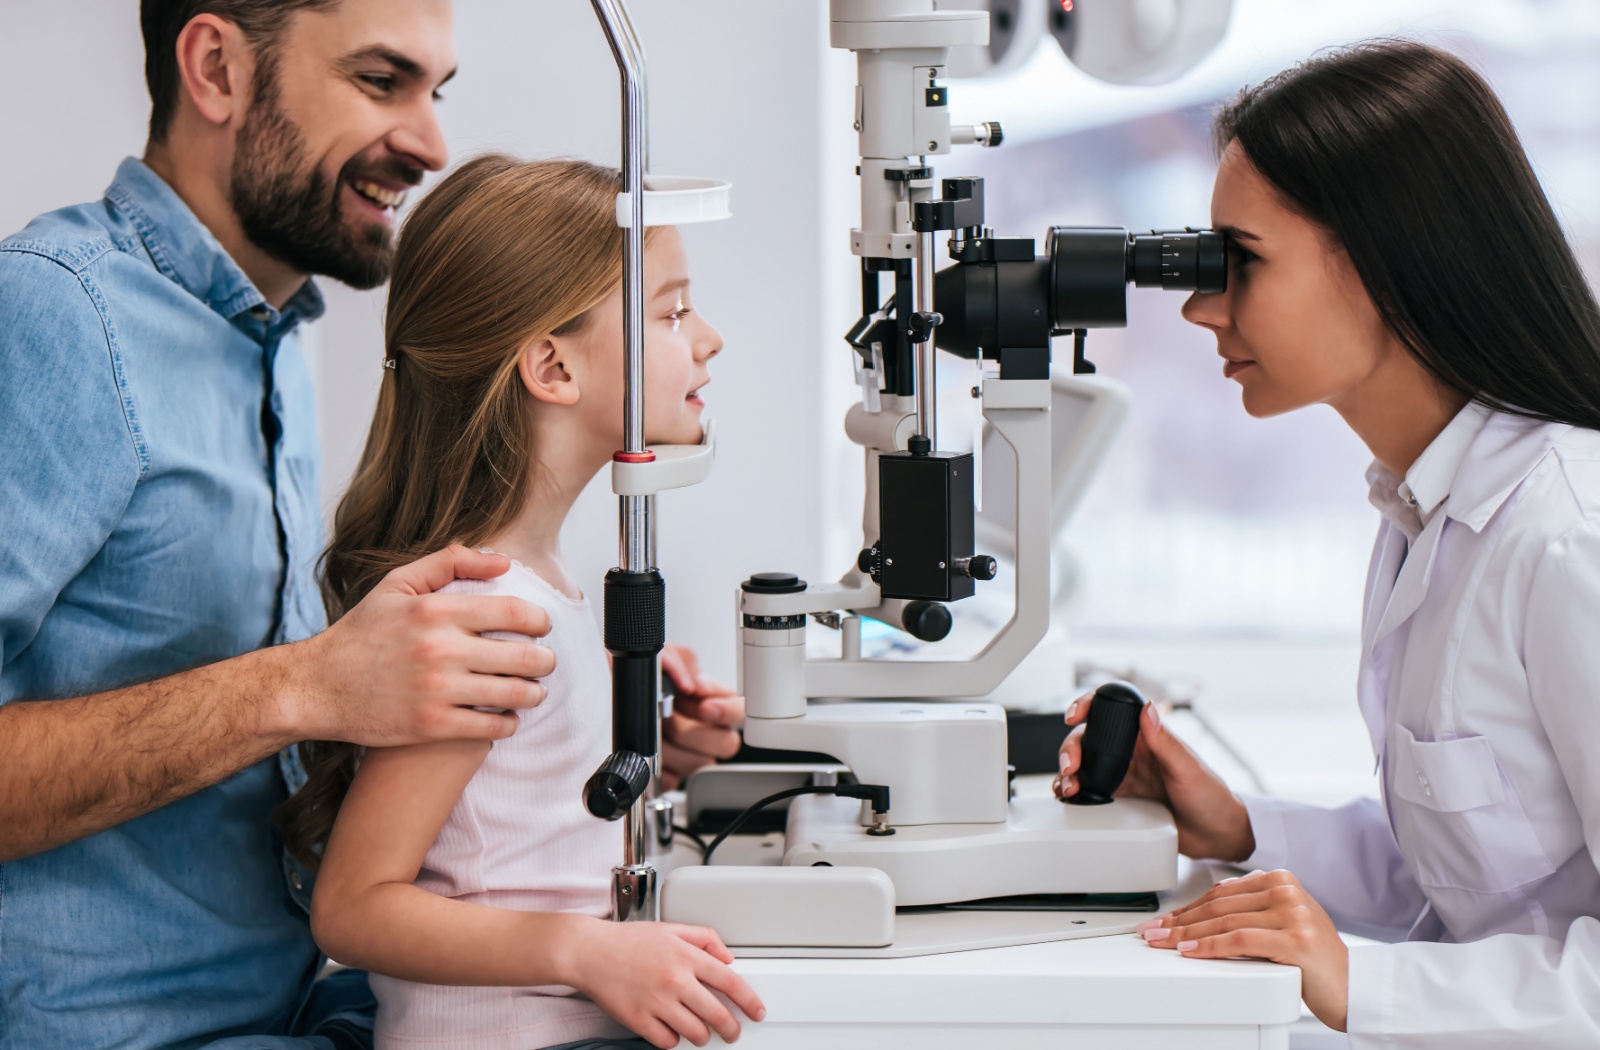 A father and daughter sit together during an exam as an optometrist examines the daughter's eyes.